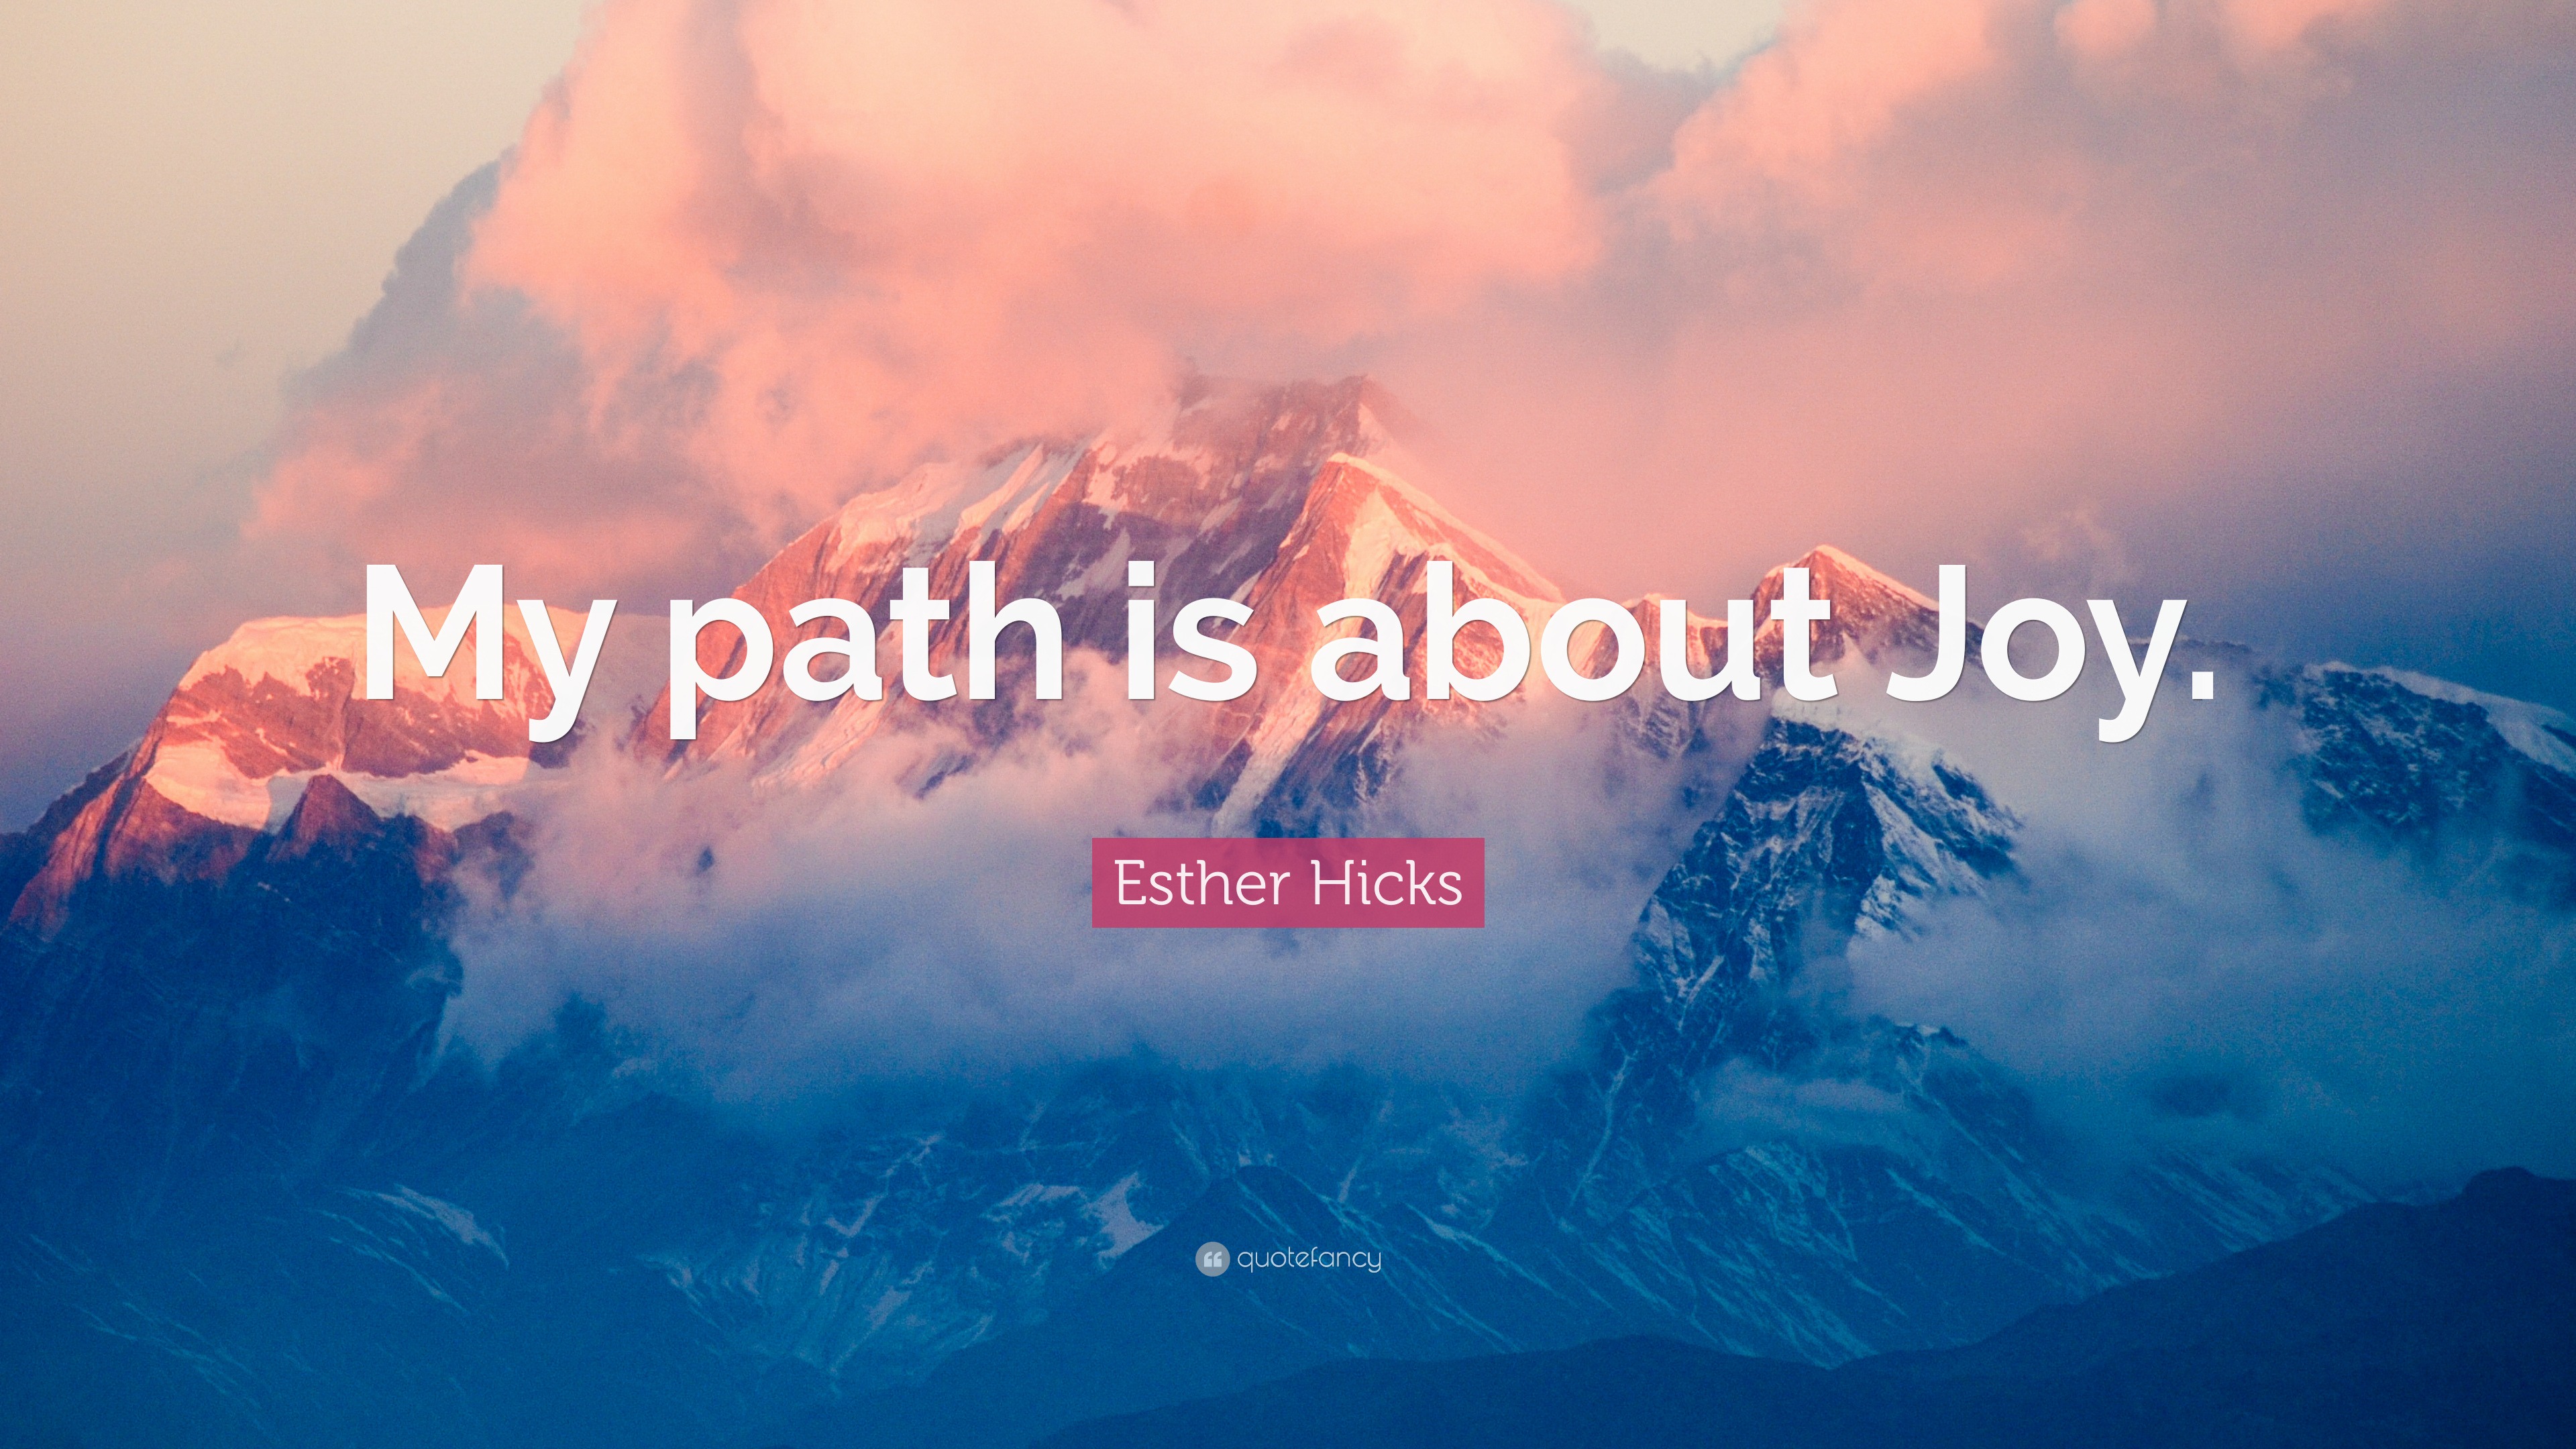 Esther Hicks Quote: “My path is about Joy.”